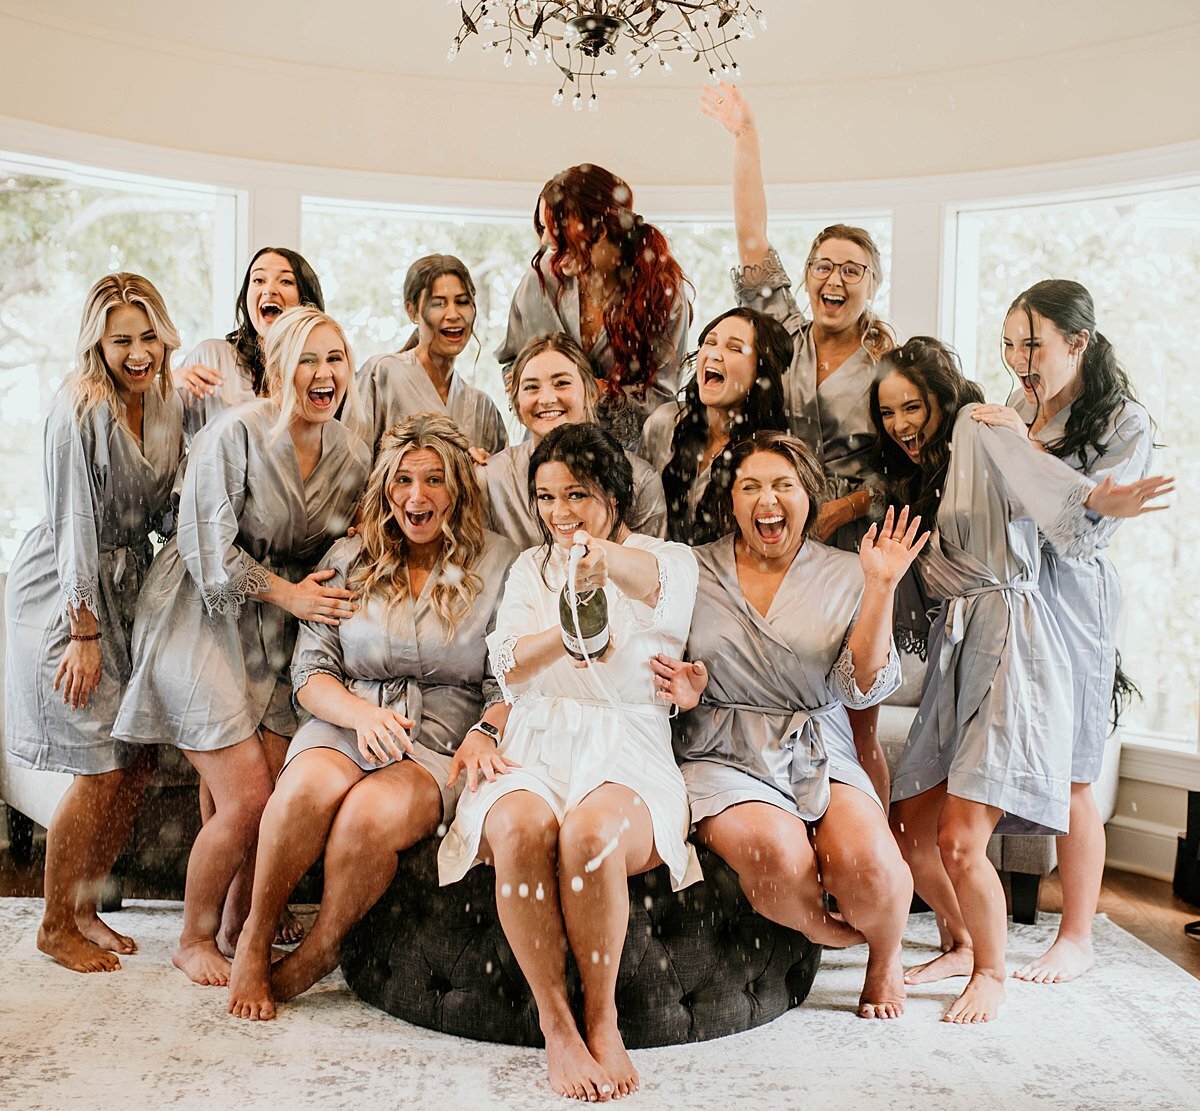 The bride and bridesmaids wearing matching gray robes as they get ready for a wedding at The Estate at Cherokee Dock